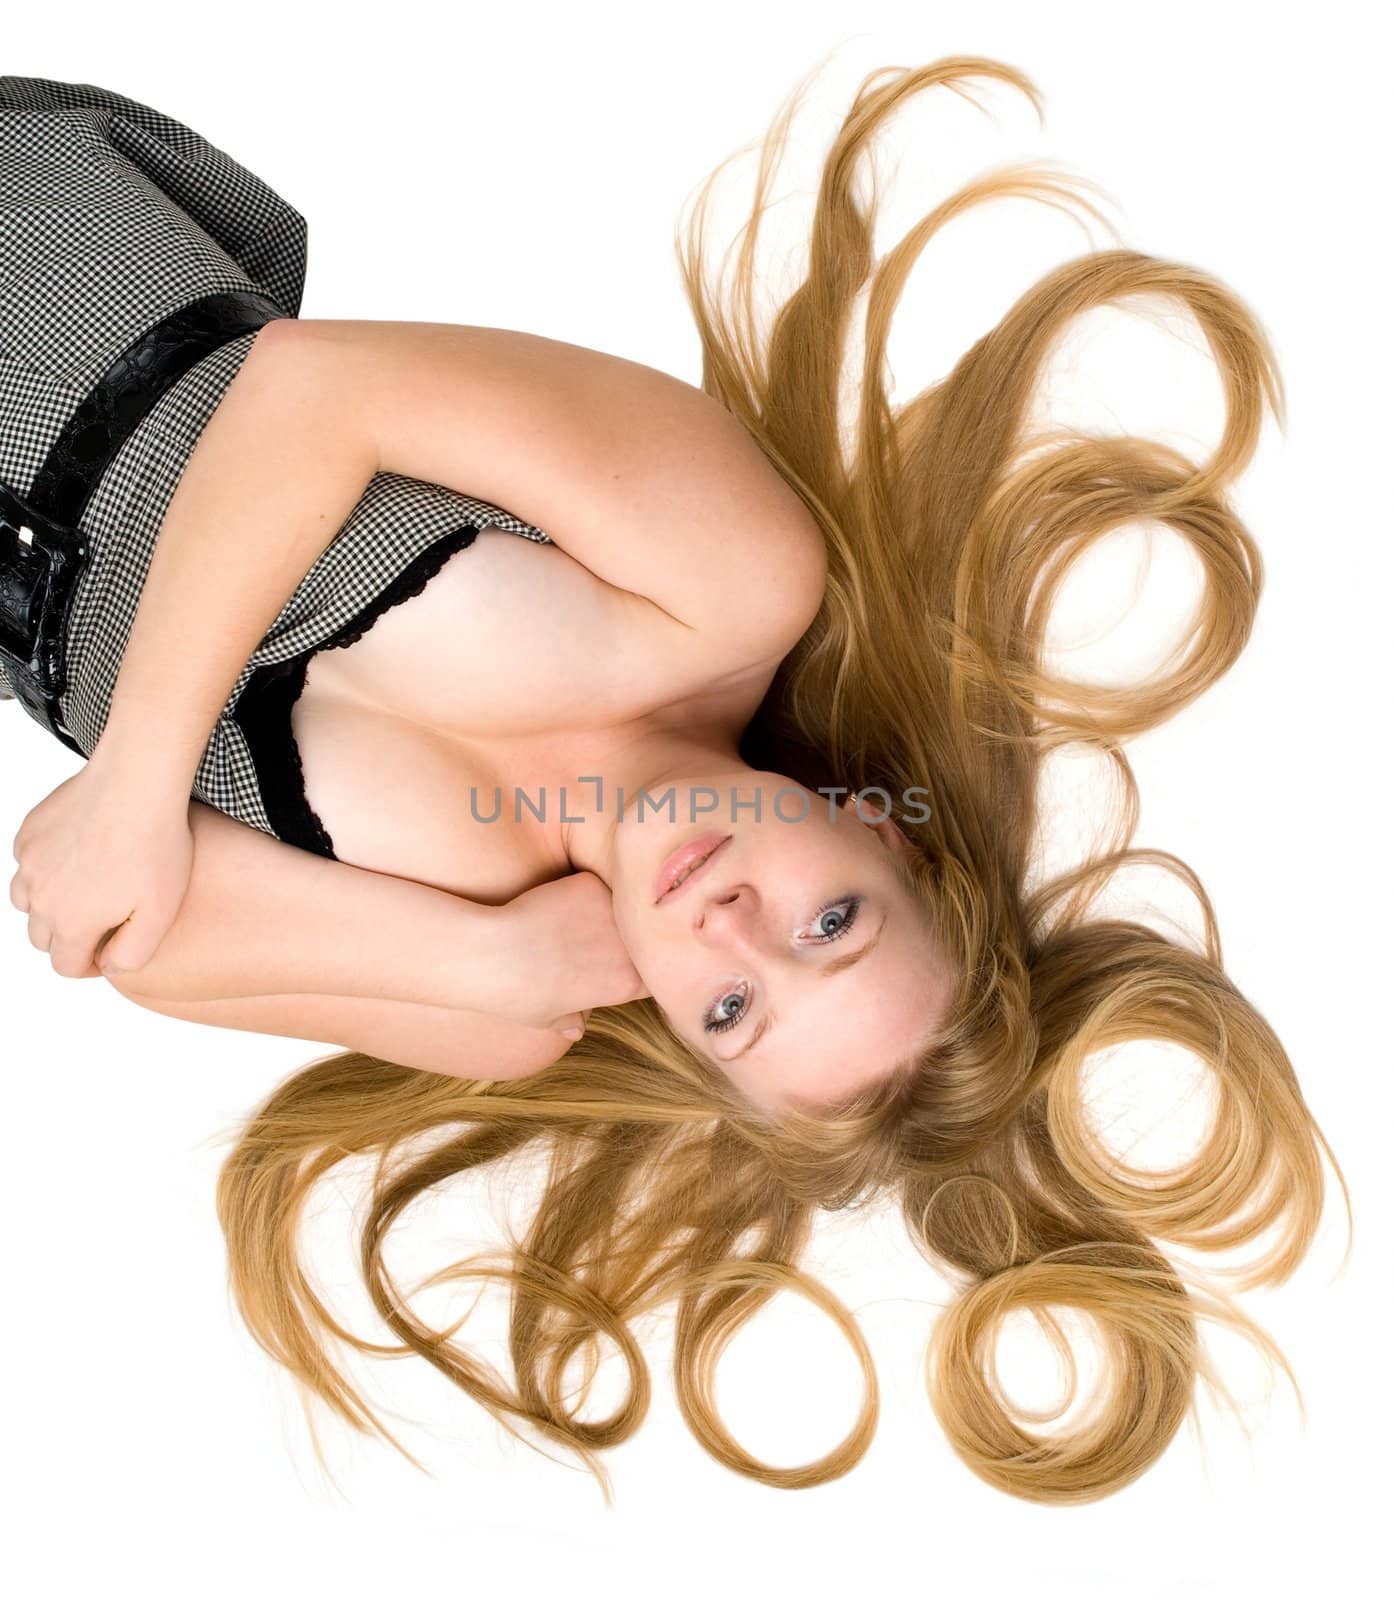 Great hair. Portrait of a sexy woman lying against isolated white background